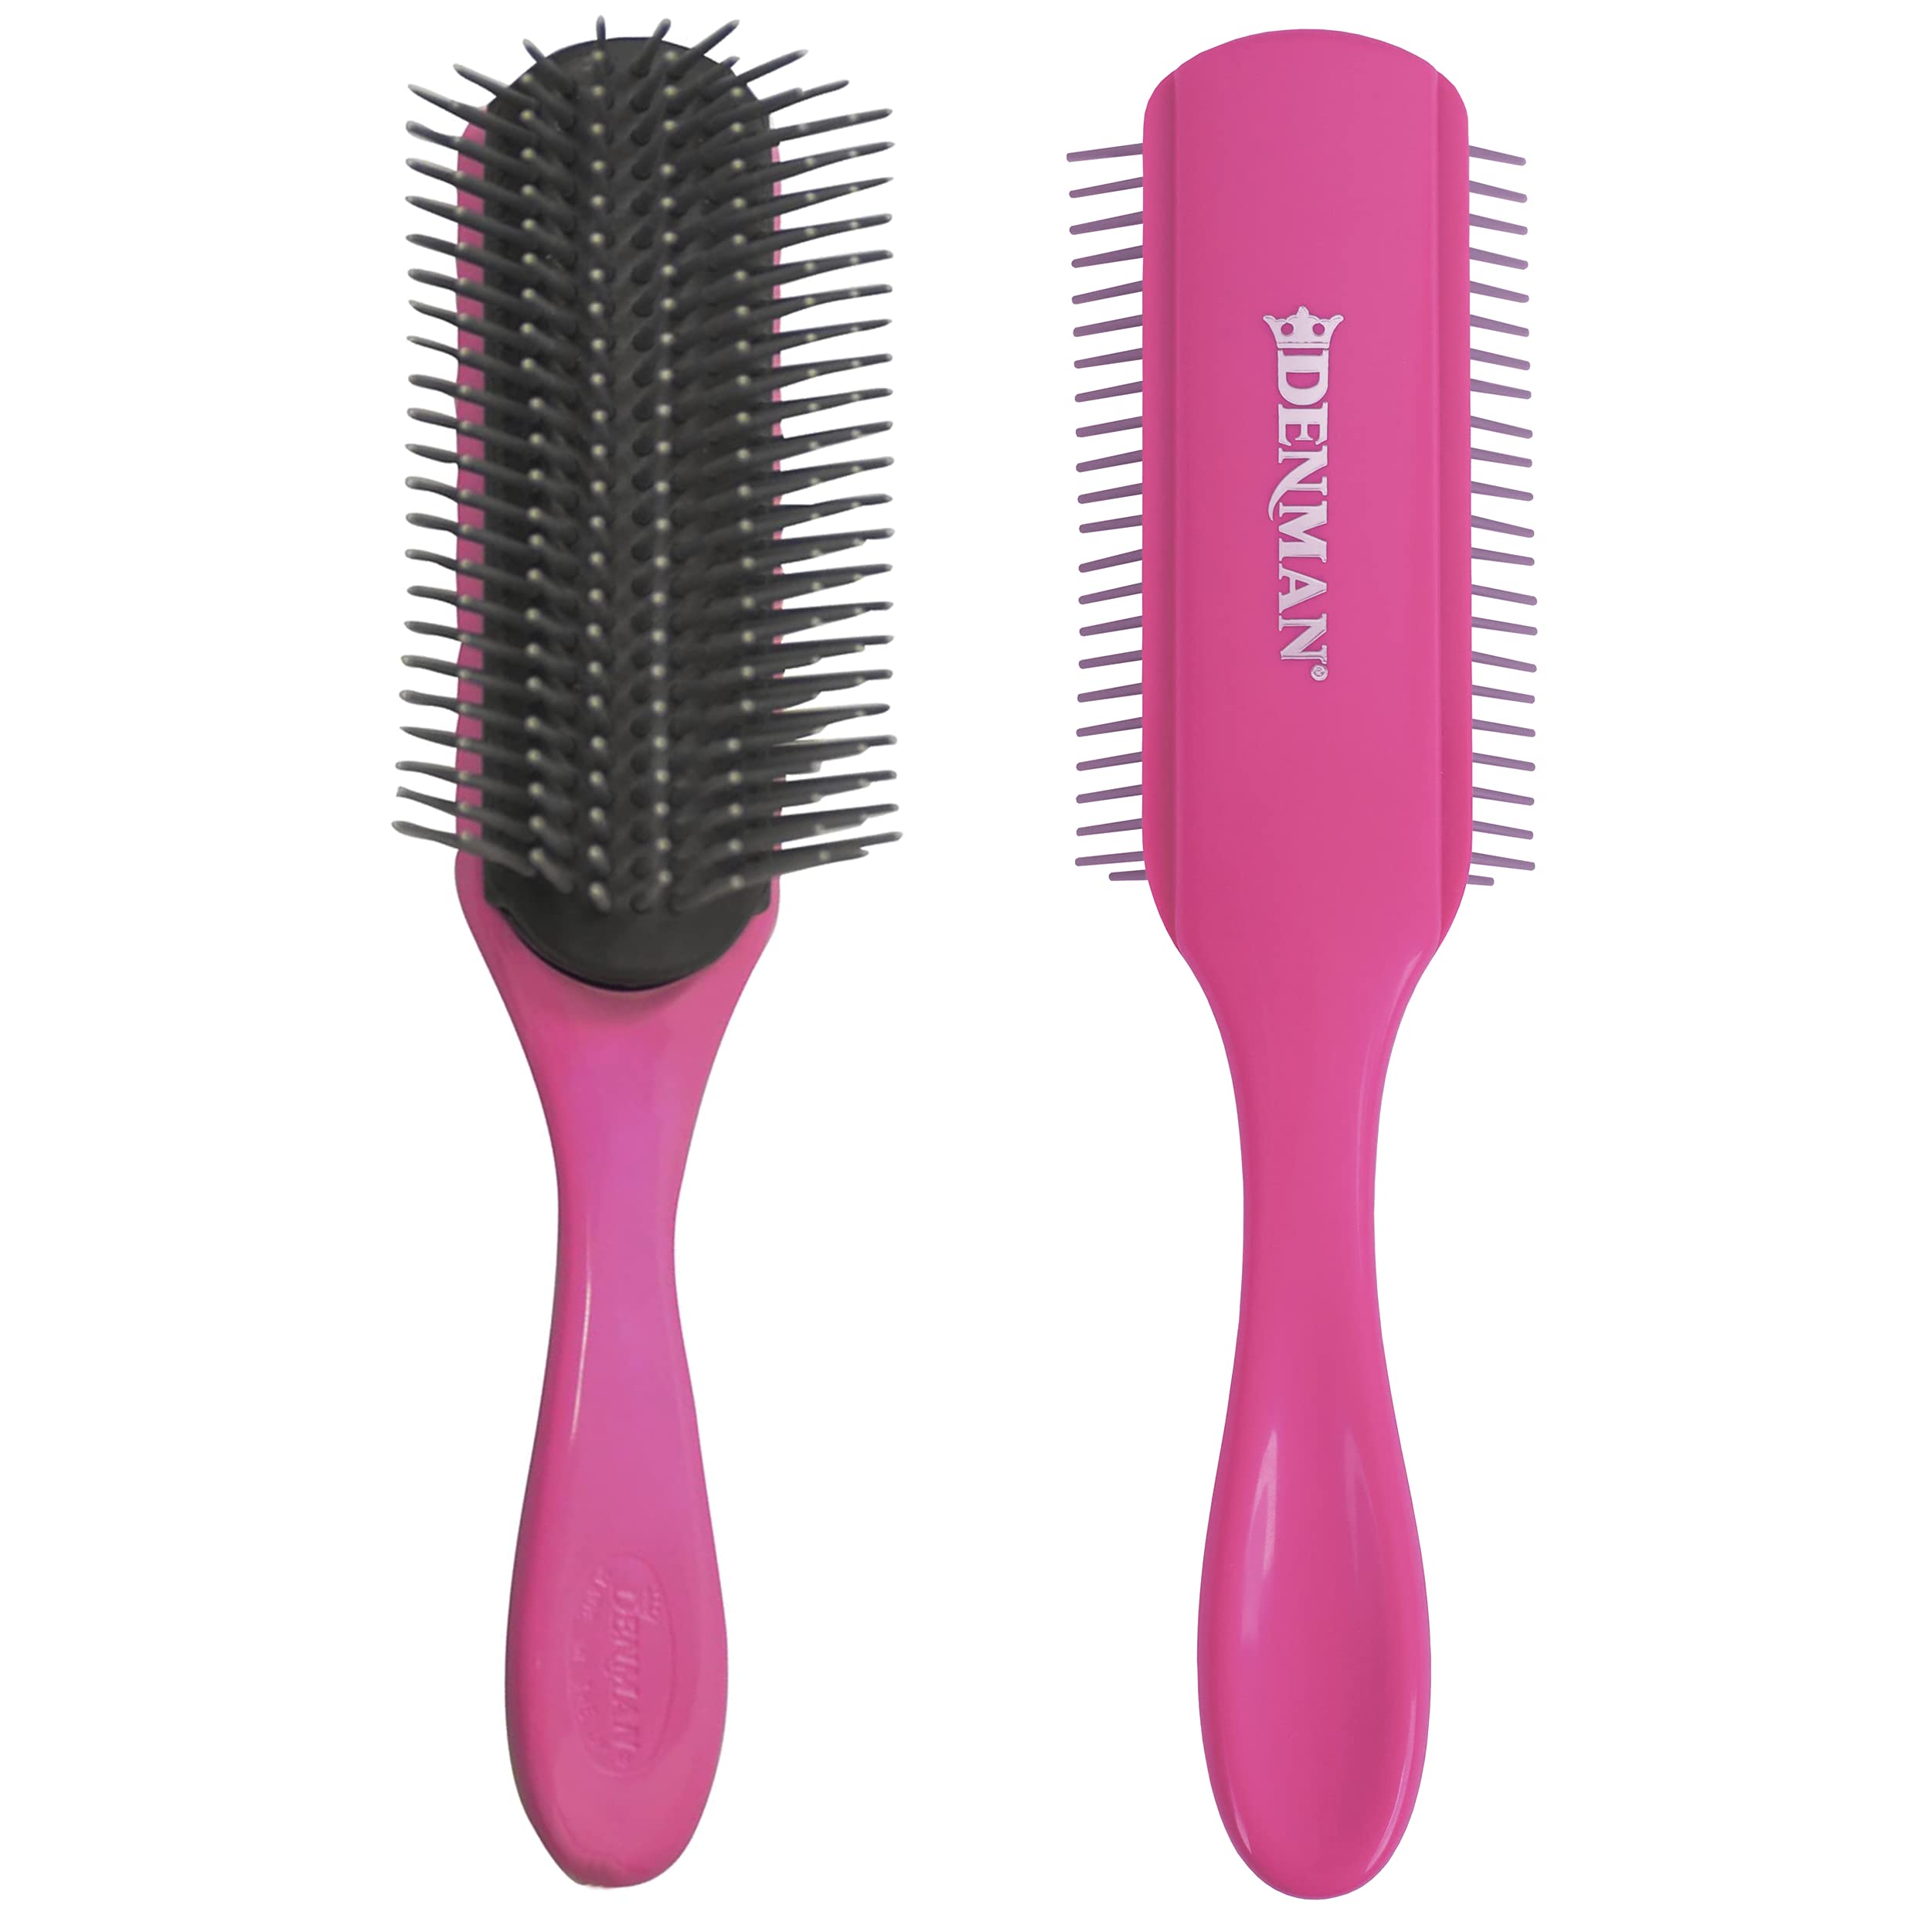 Denman Curly Hair Brush D4 (Pink, Silver Pins) 9 Row Styling Brush for Styling, Smoothing Longer Hair and Defining Curls - For Women and Men